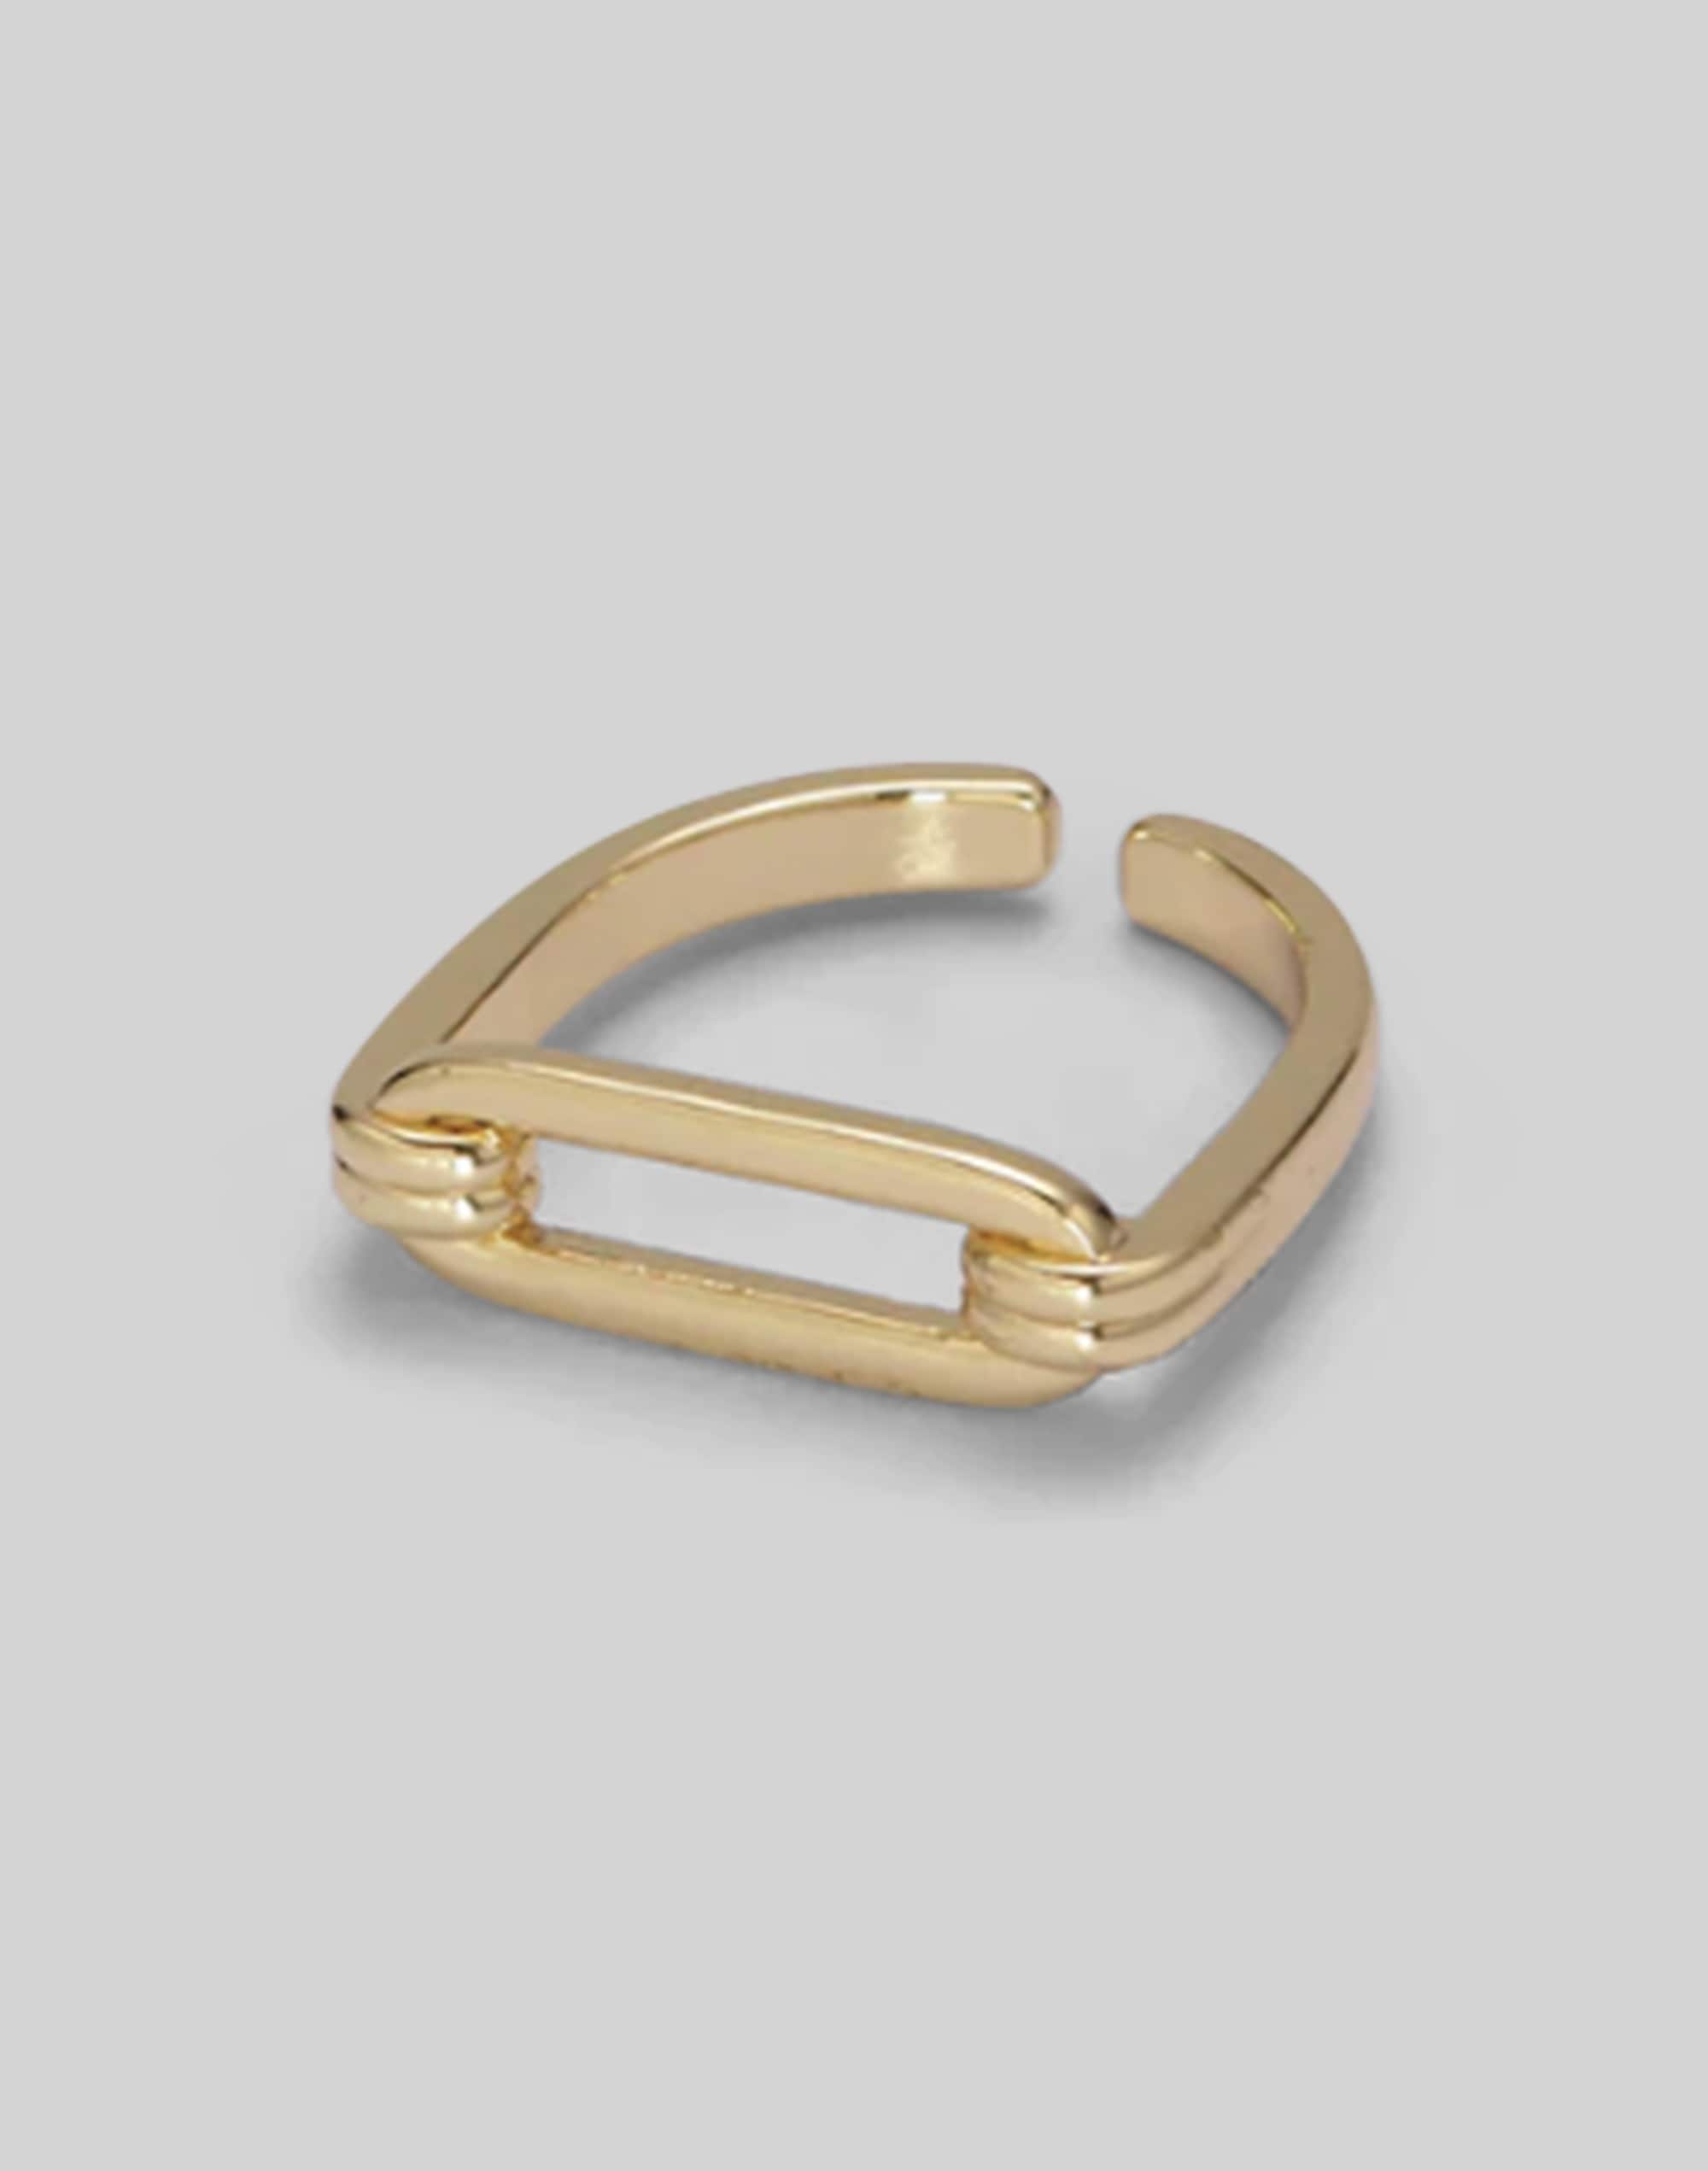 Abcrete & Co. The Open Signet Ring